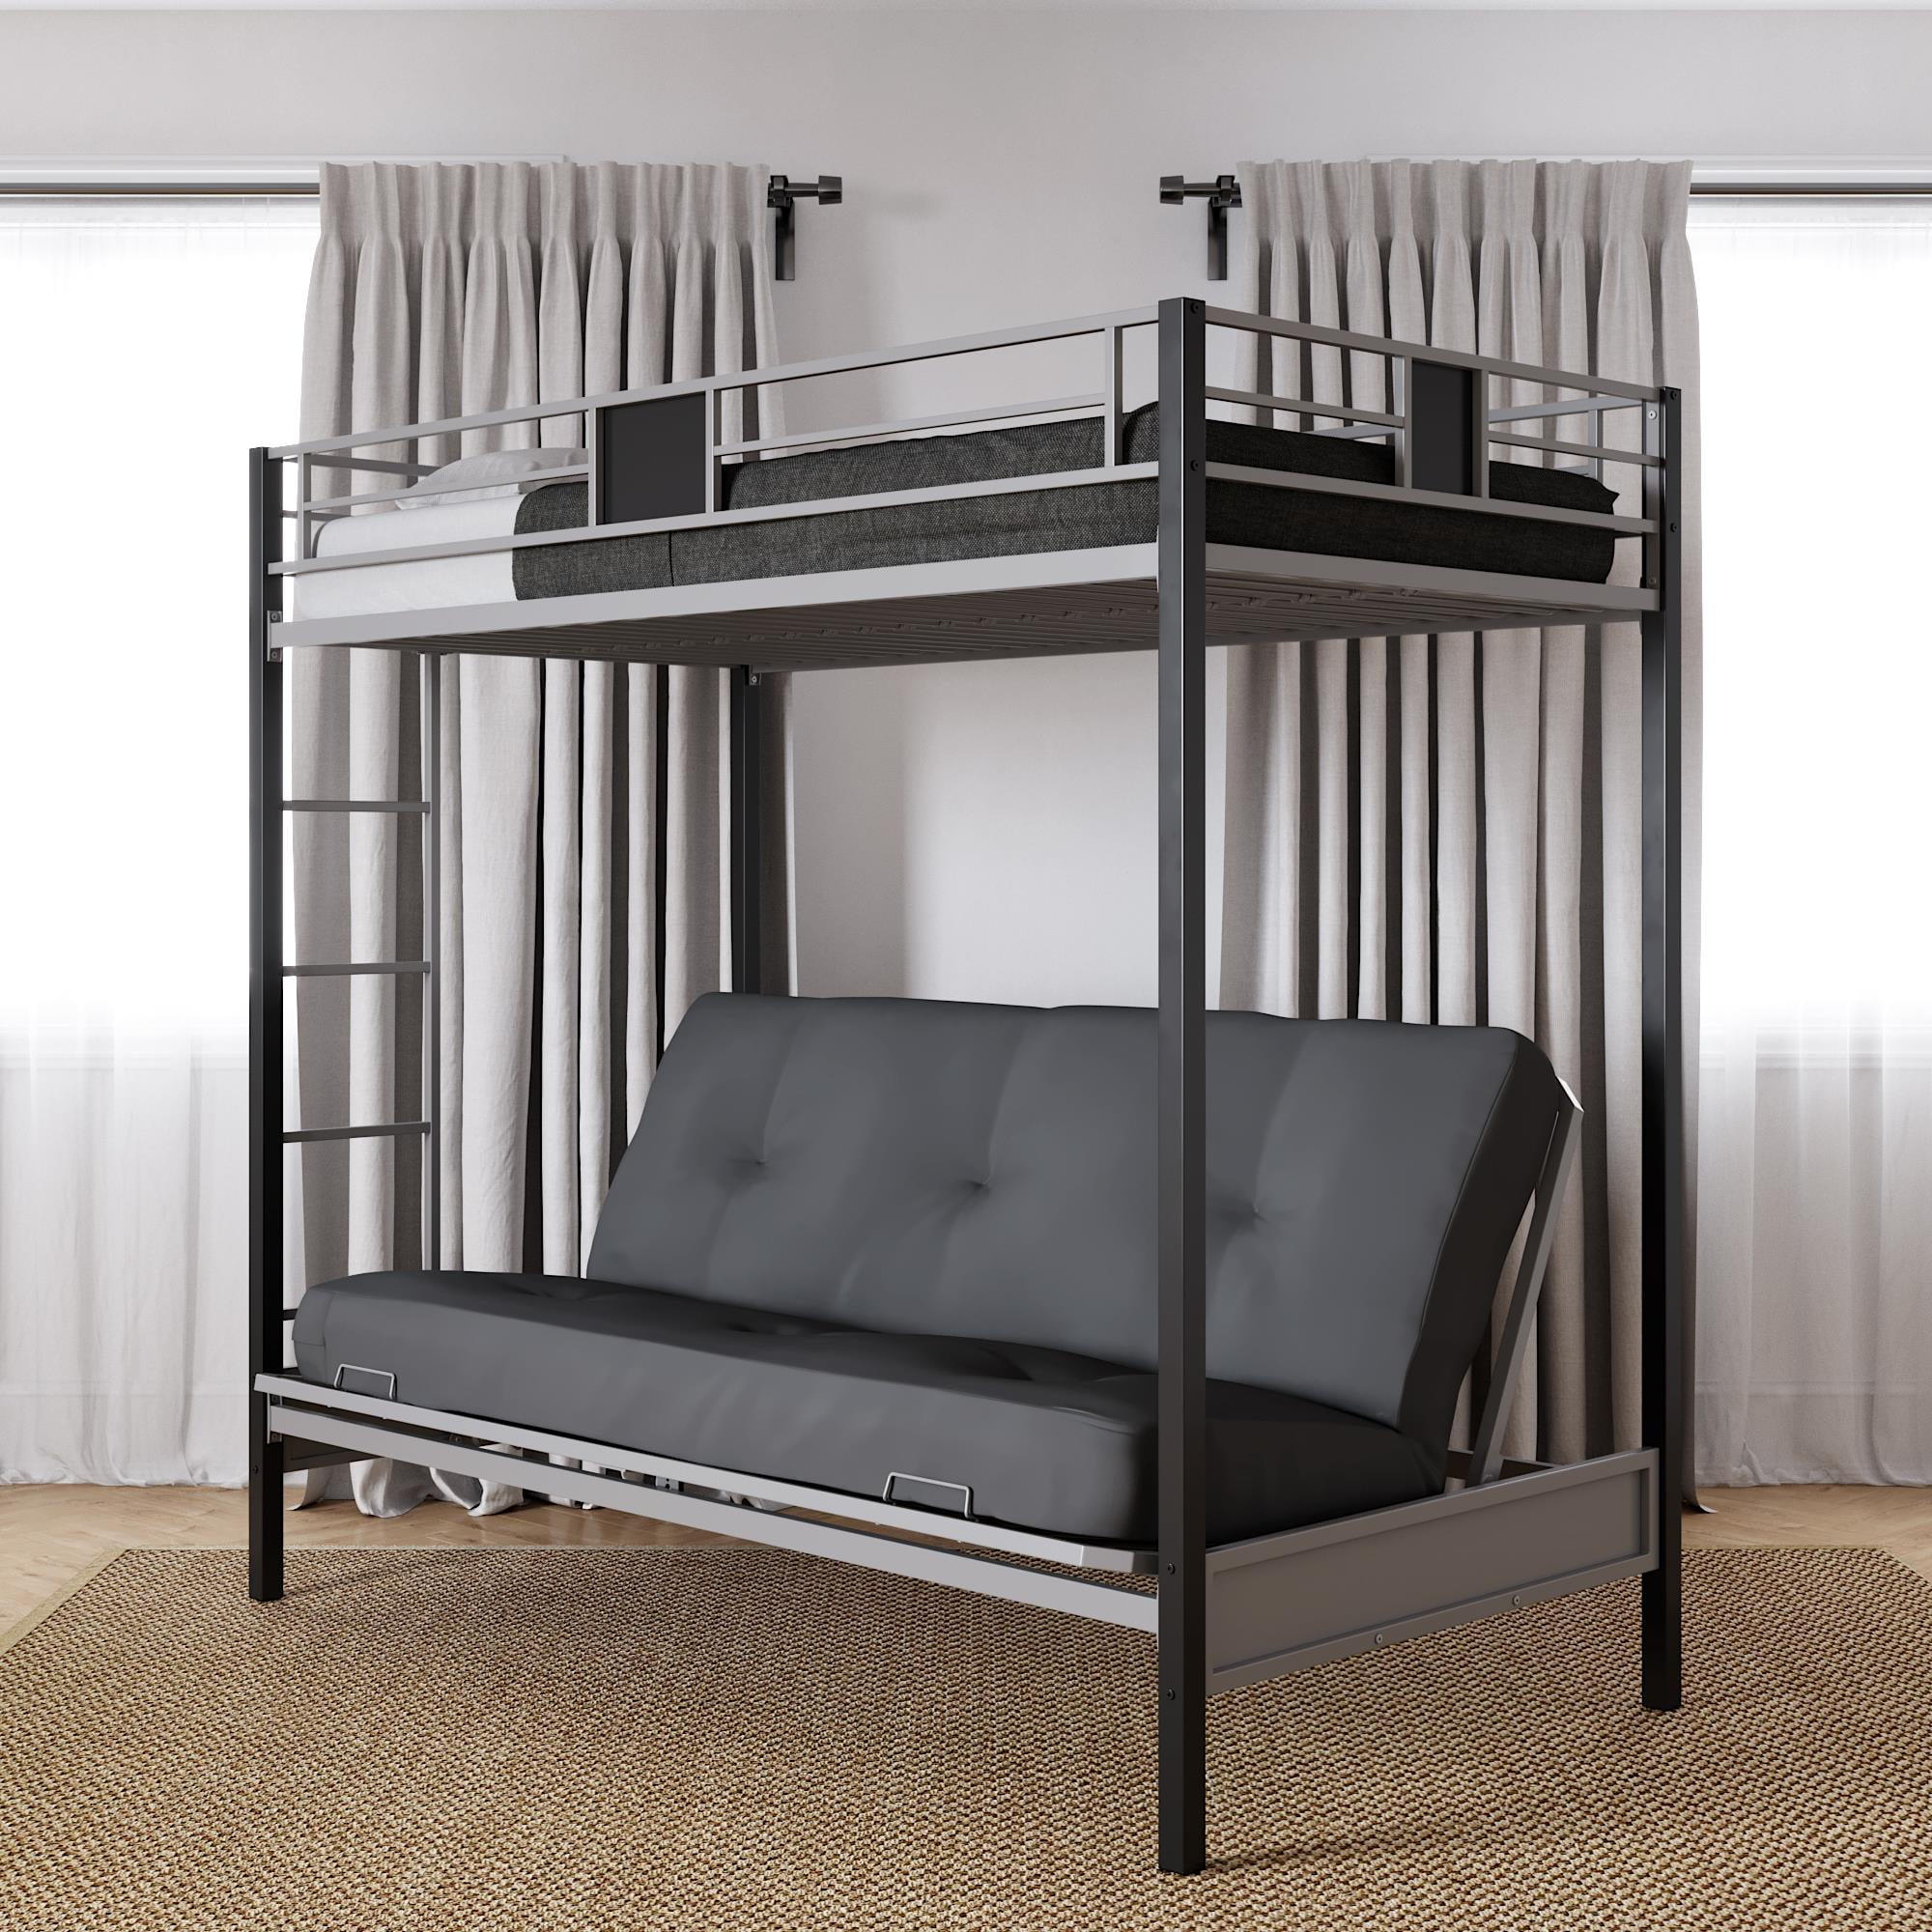 River Street Designs Silver Screen Twin, Bunk Beds With Sofa At The Bottom